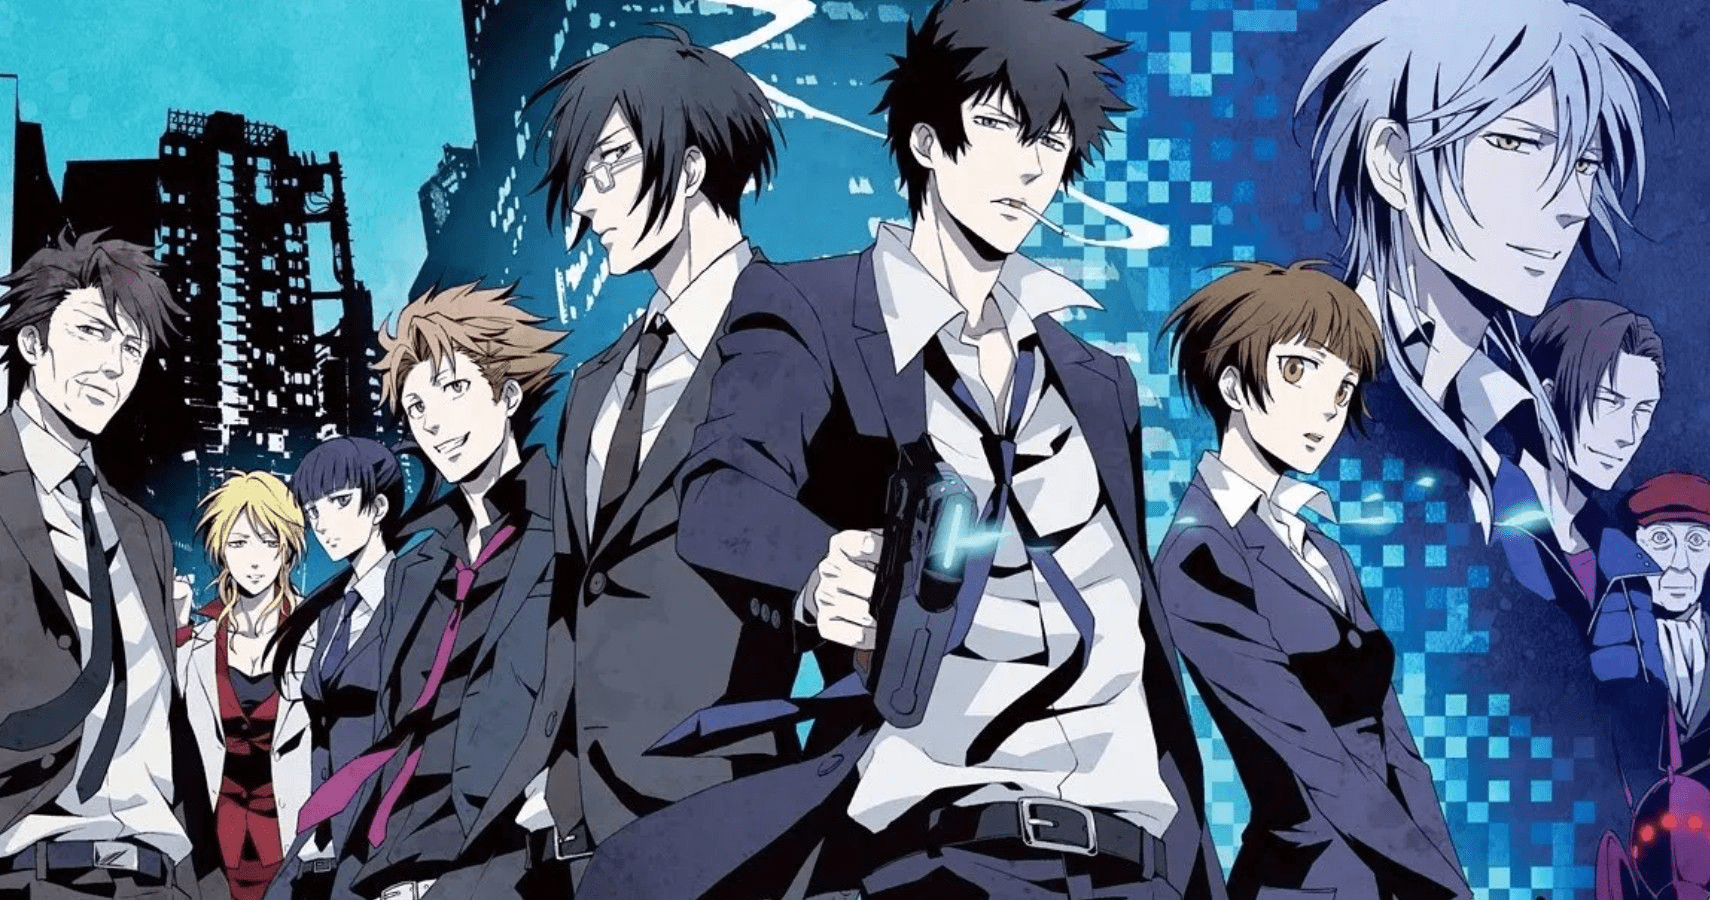 Psycho-Pass would be a hit if you enjoyed dark thrillers like Black Mirror.